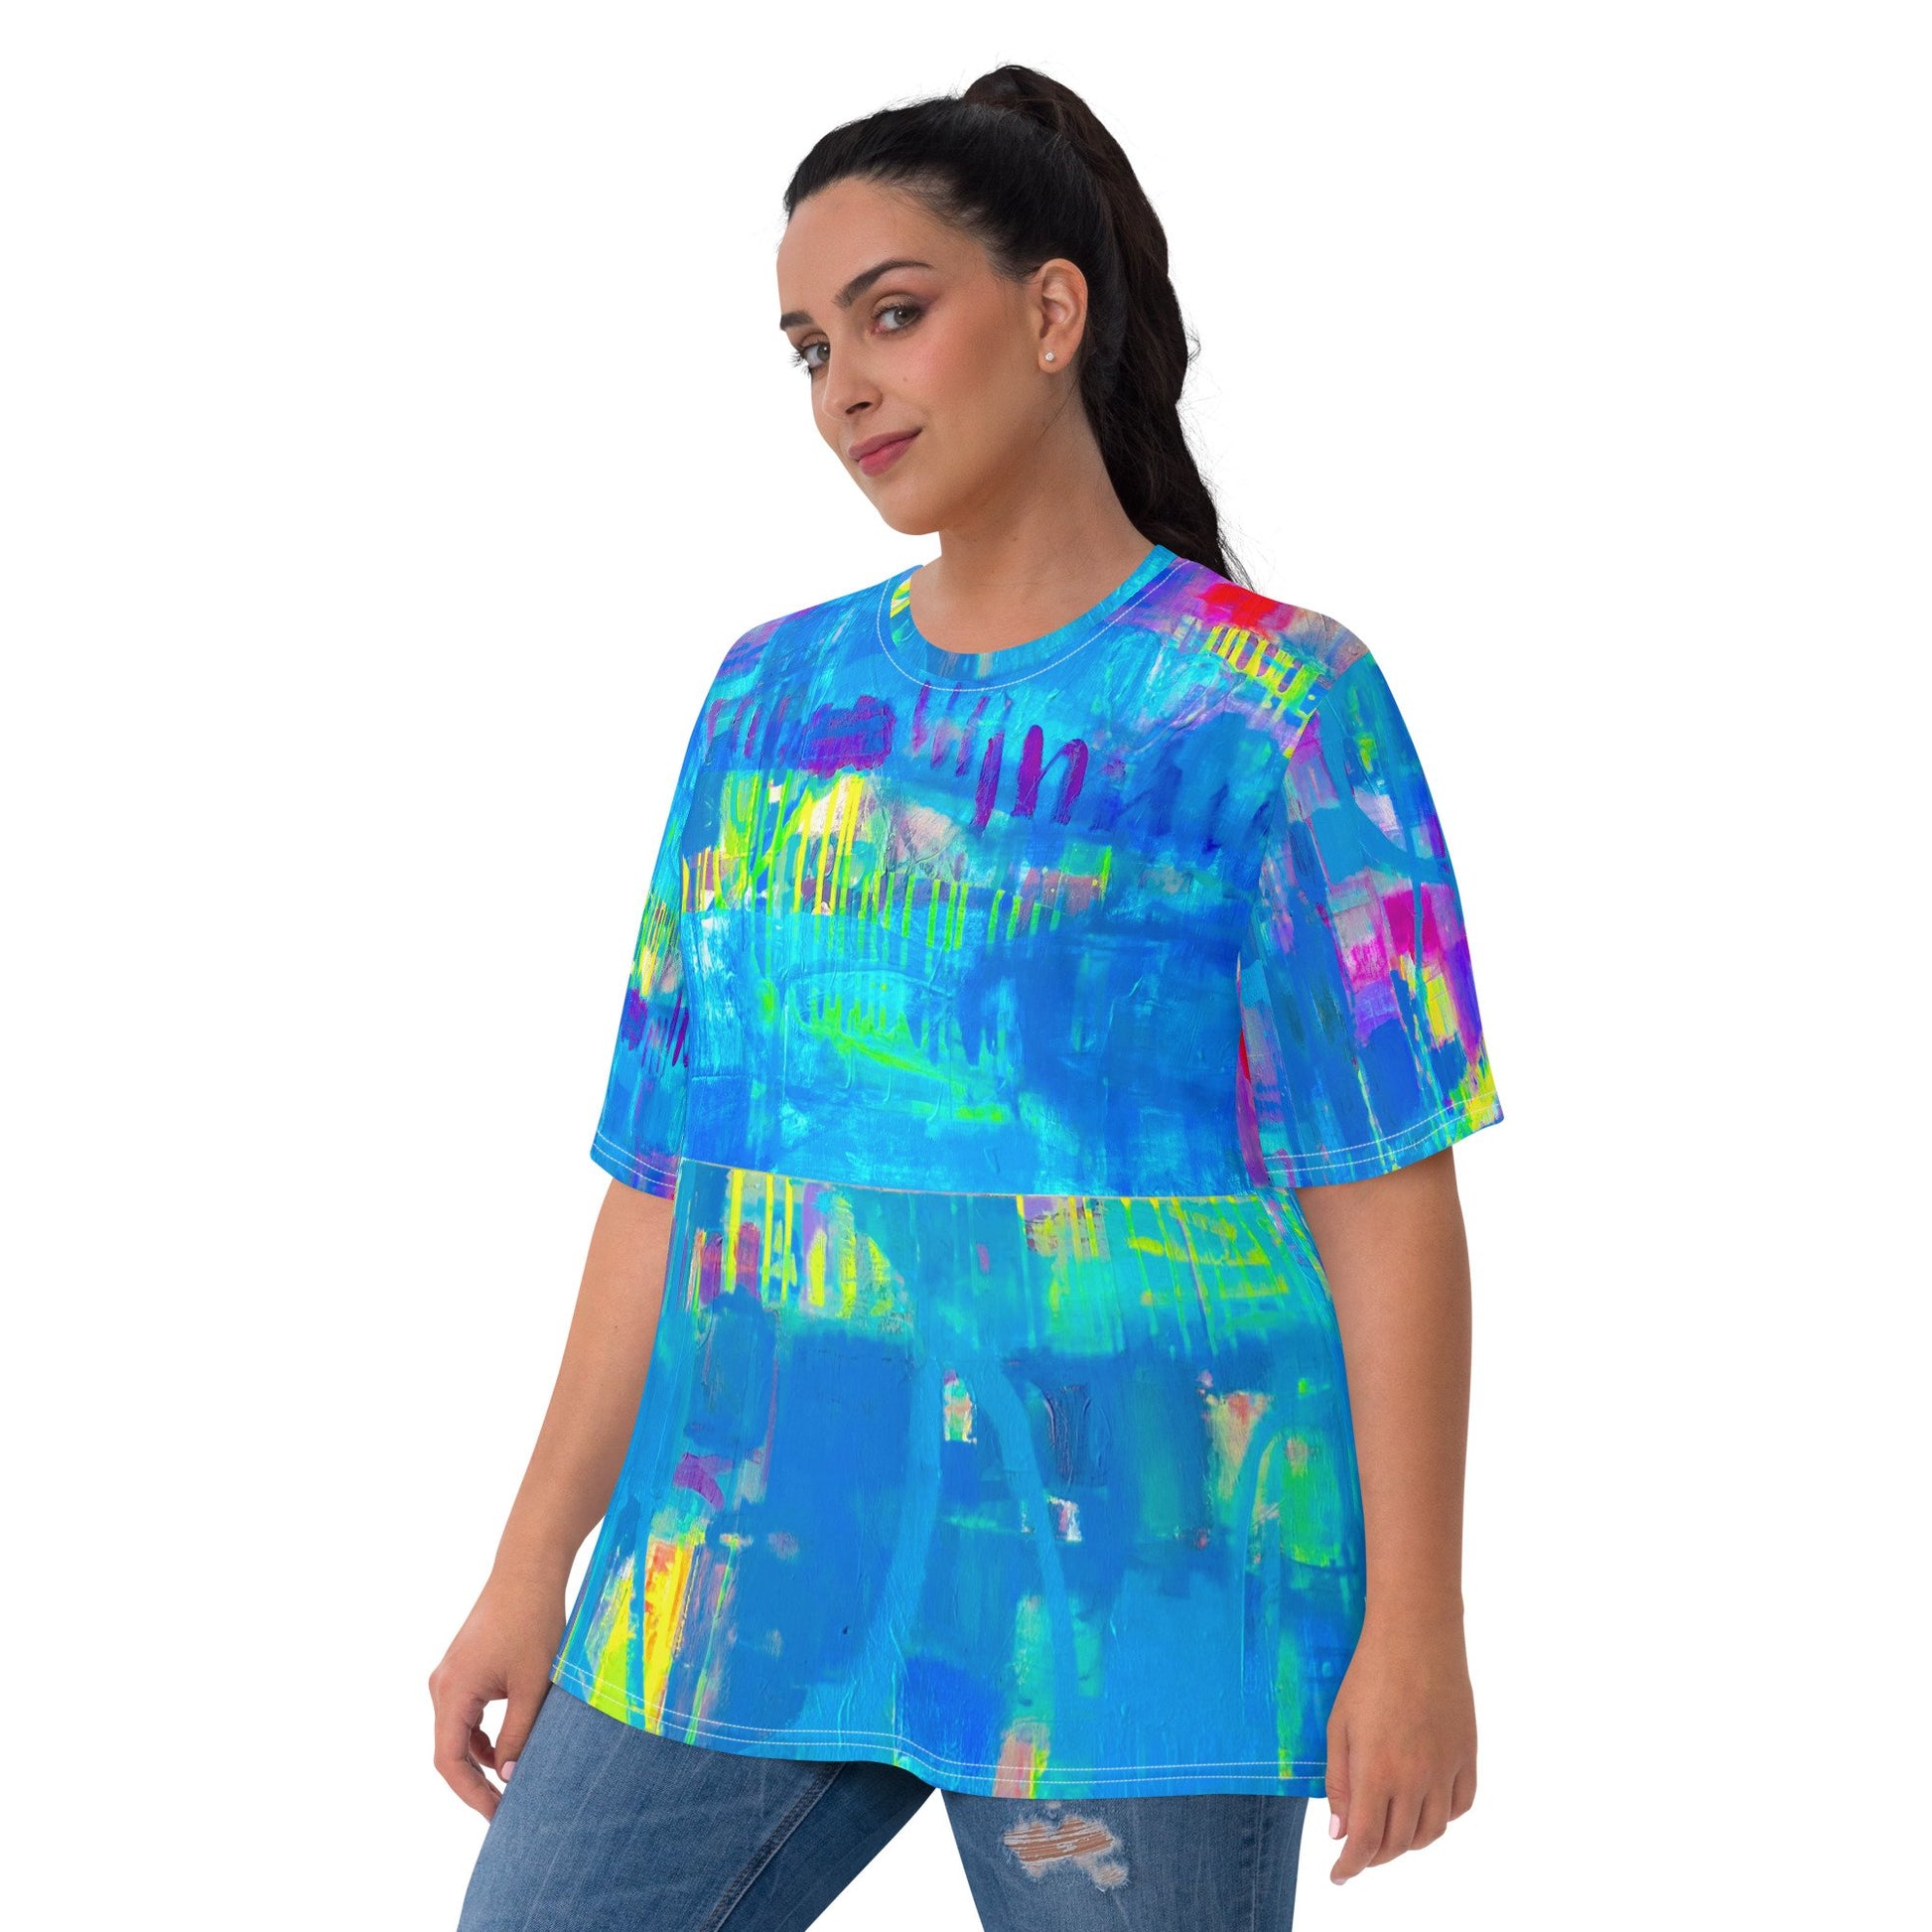 Coloring the Motion - Women's T-shirt